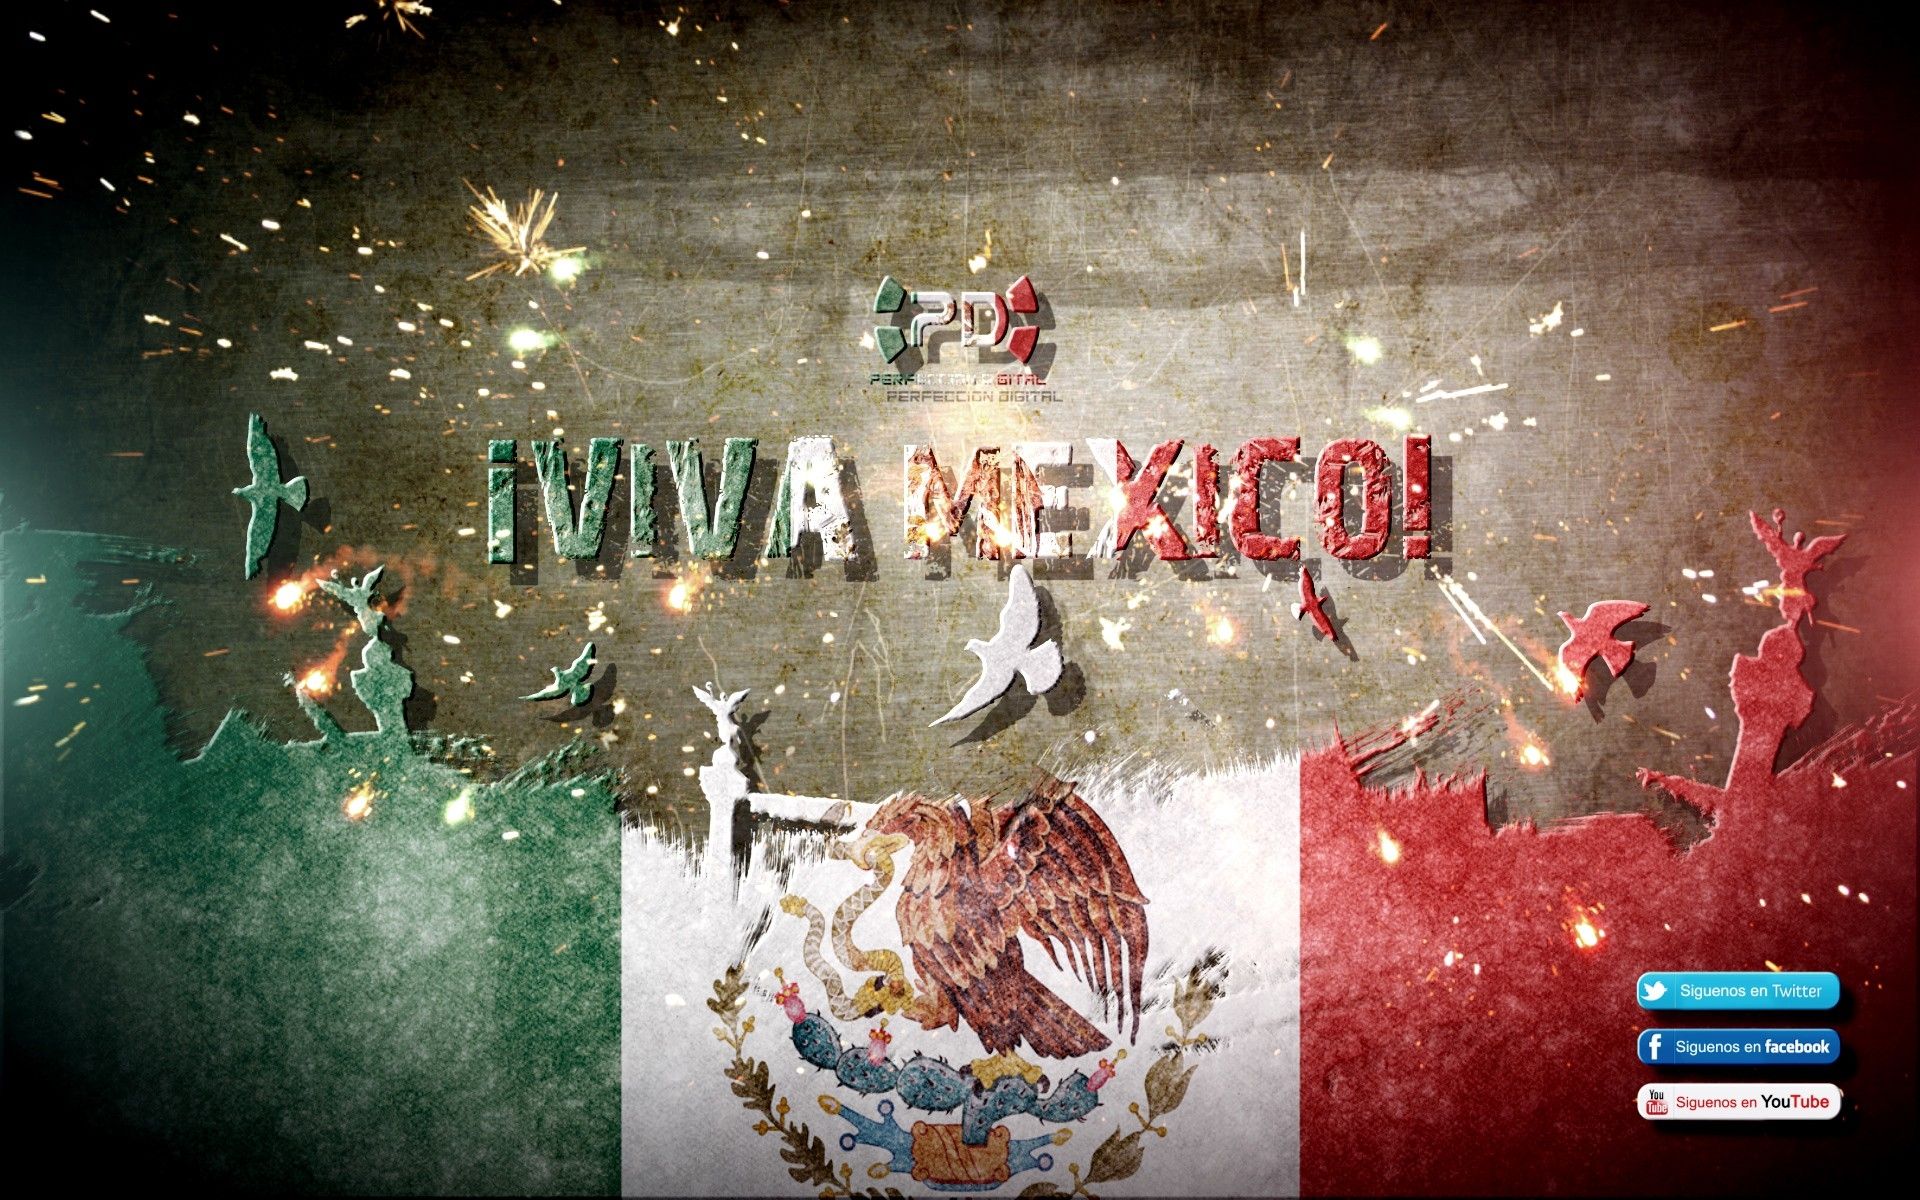 Download Wallpaper, Download 1920x1200 mexico independence day logos mexican m233xico city viva perfeccion digital 1920x1200 wallpape People HD Wallpaper, Hi Res People Wallpaper, High Definition Wallpaper